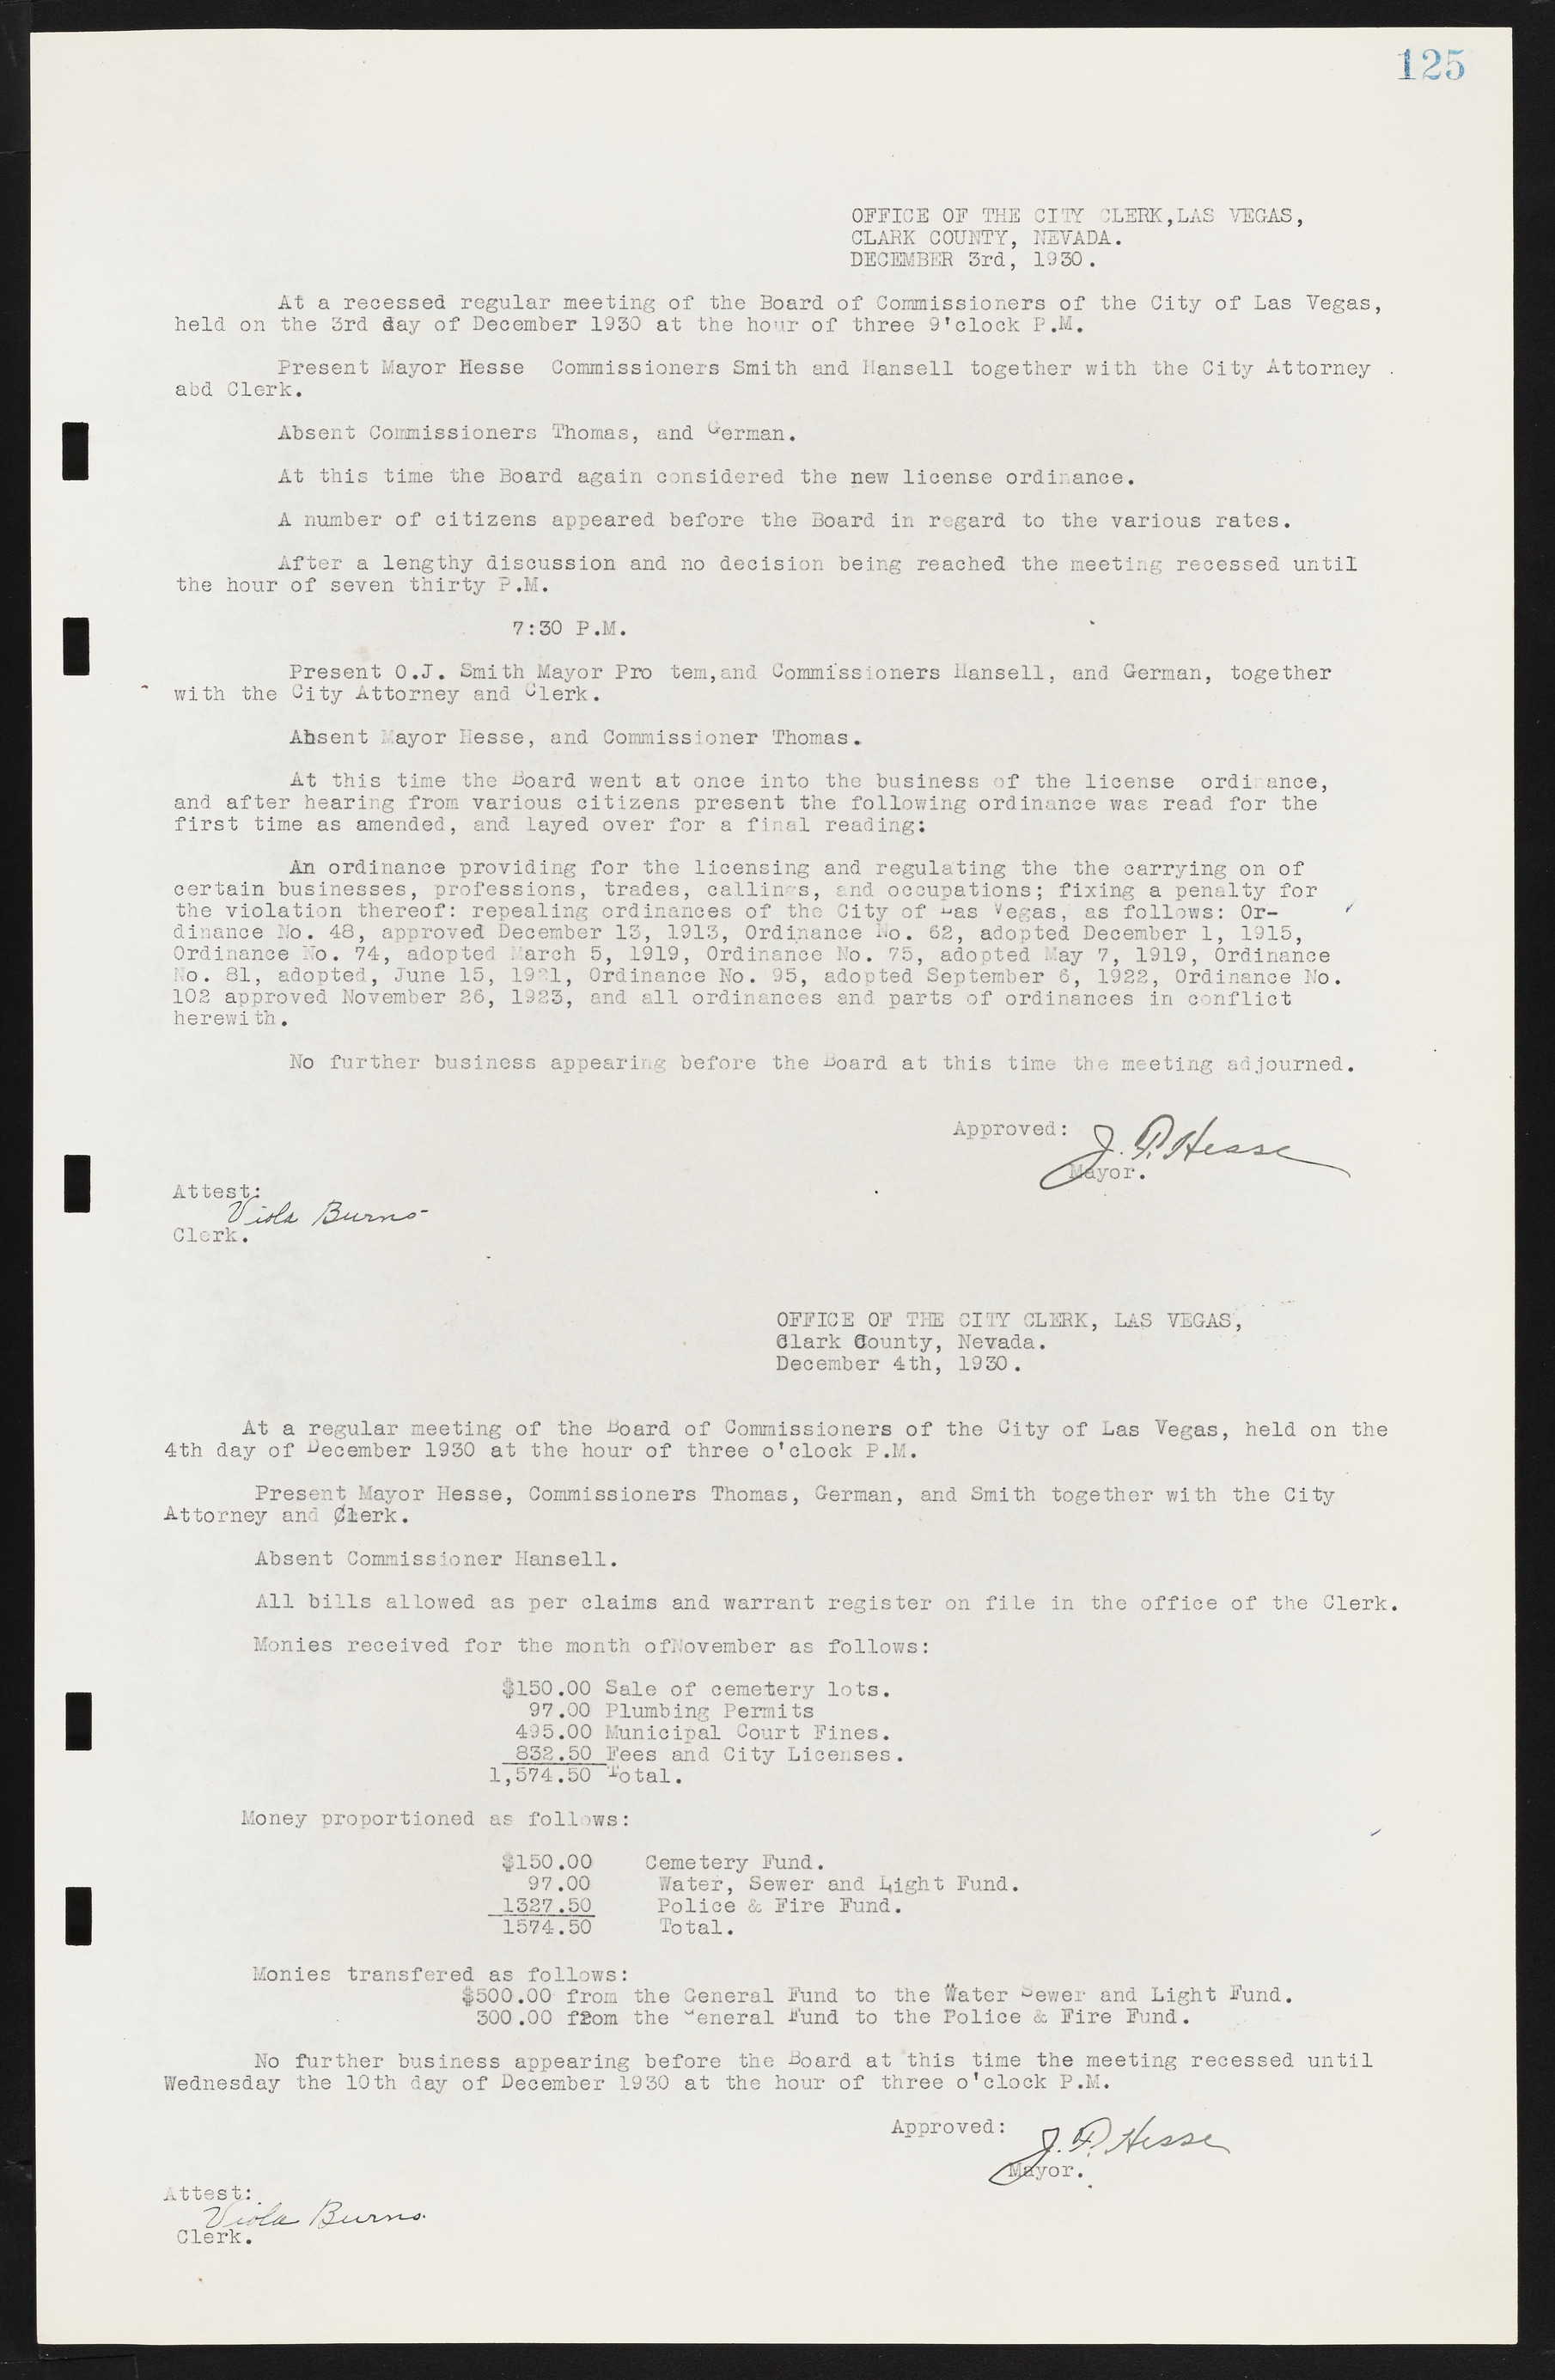 Las Vegas City Commission Minutes, May 14, 1929 to February 11, 1937, lvc000003-131